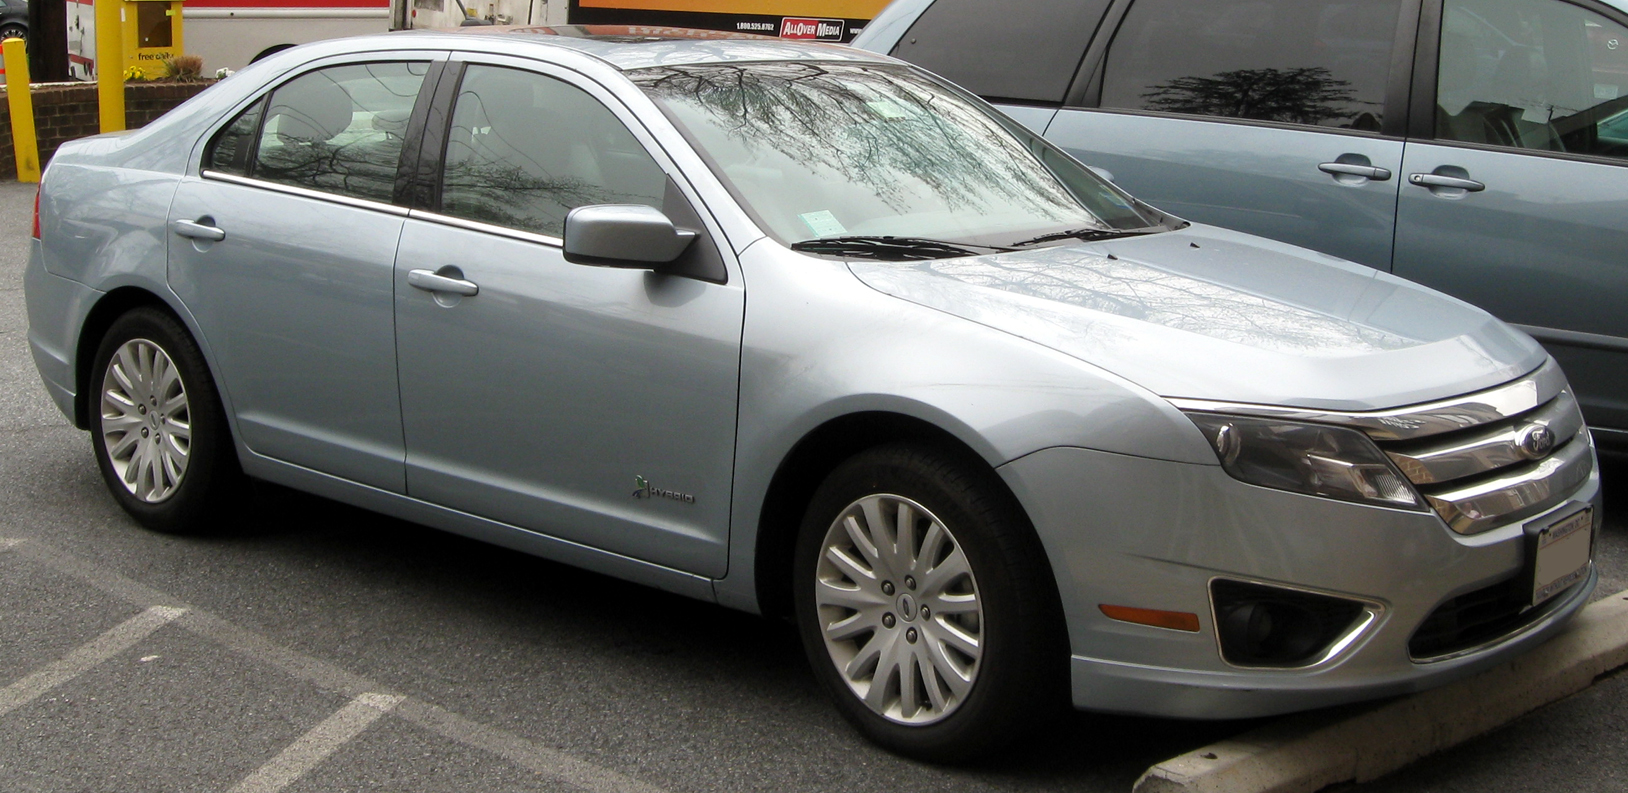 File:2010-2012 Ford Fusion Hybrid -- 03-21-2012.JPG - Wikimedia Commons